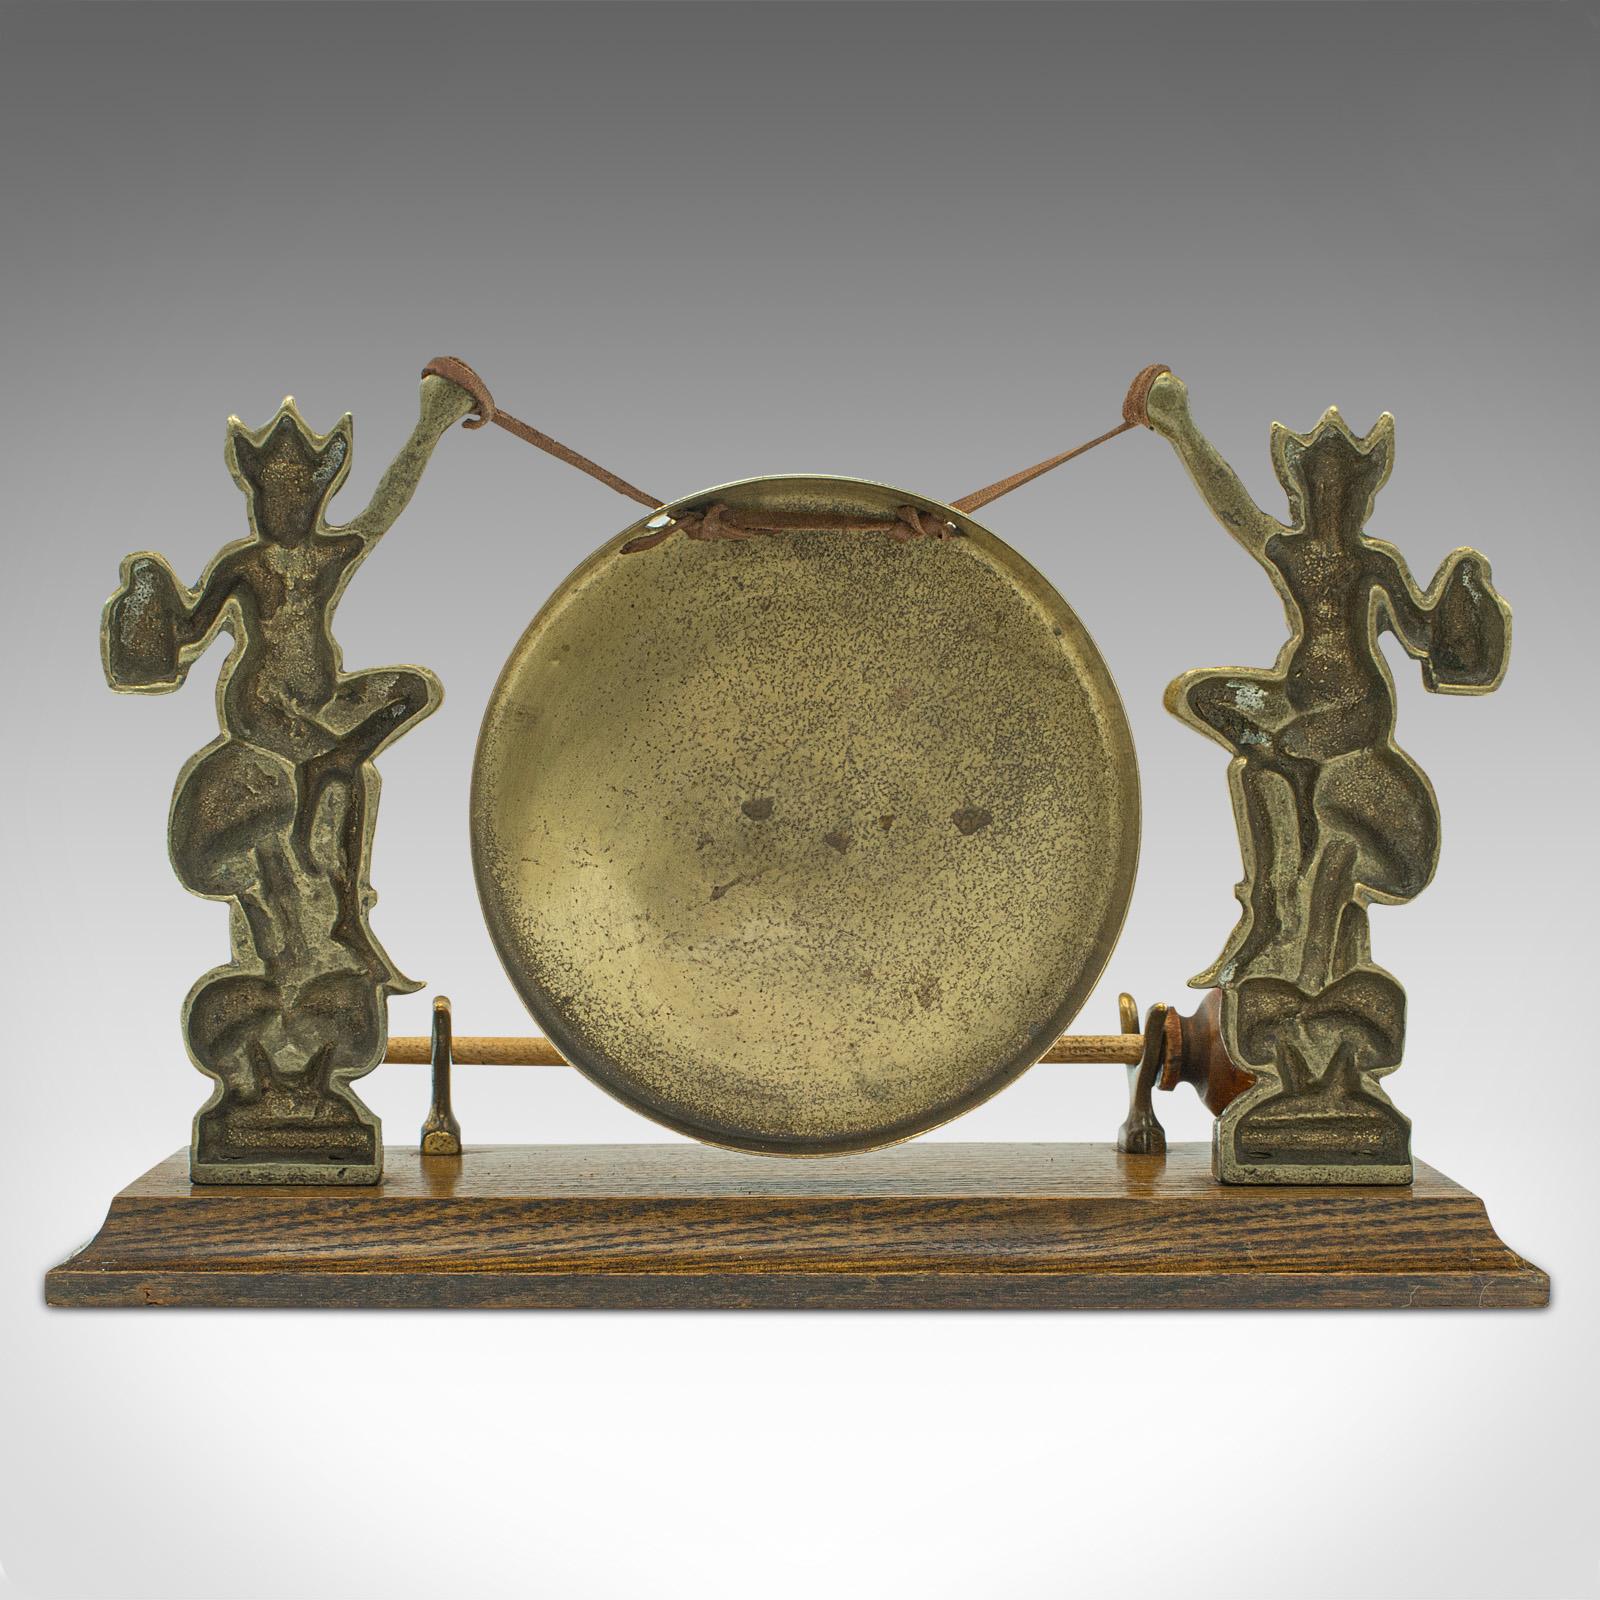 Antique Cornish Pixie Gong, English, Brass, Oak, Dinner Chime, Victorian, C.1900 In Good Condition For Sale In Hele, Devon, GB